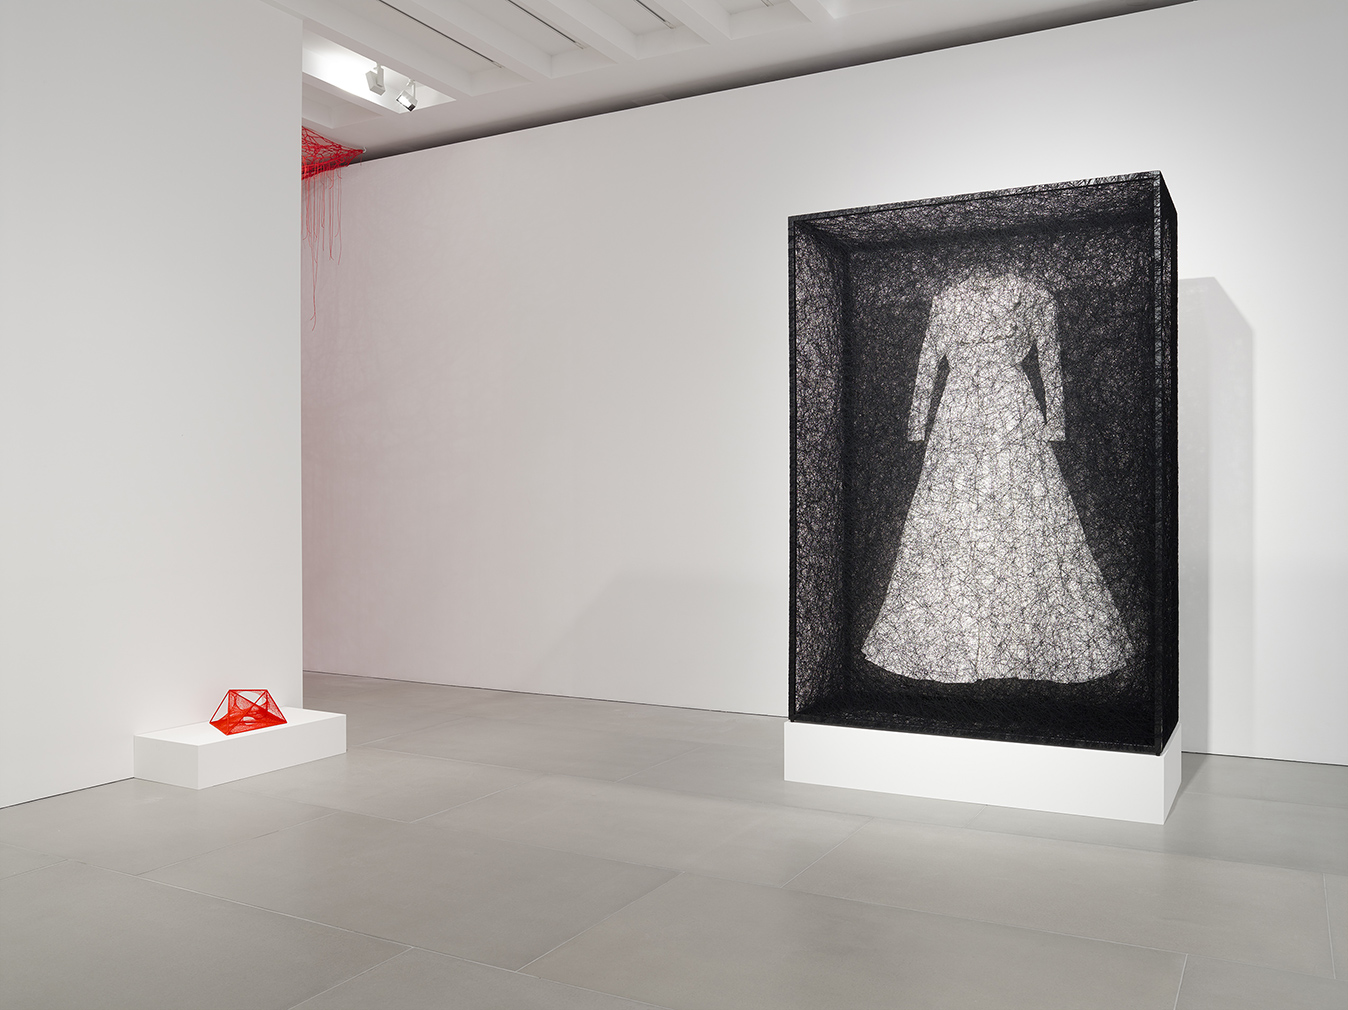 Chiharu Shiota, 'Me Somewhere Else' installation view. Courtesy of the arttist and Blain|Southern. Photography: Peter Mallet